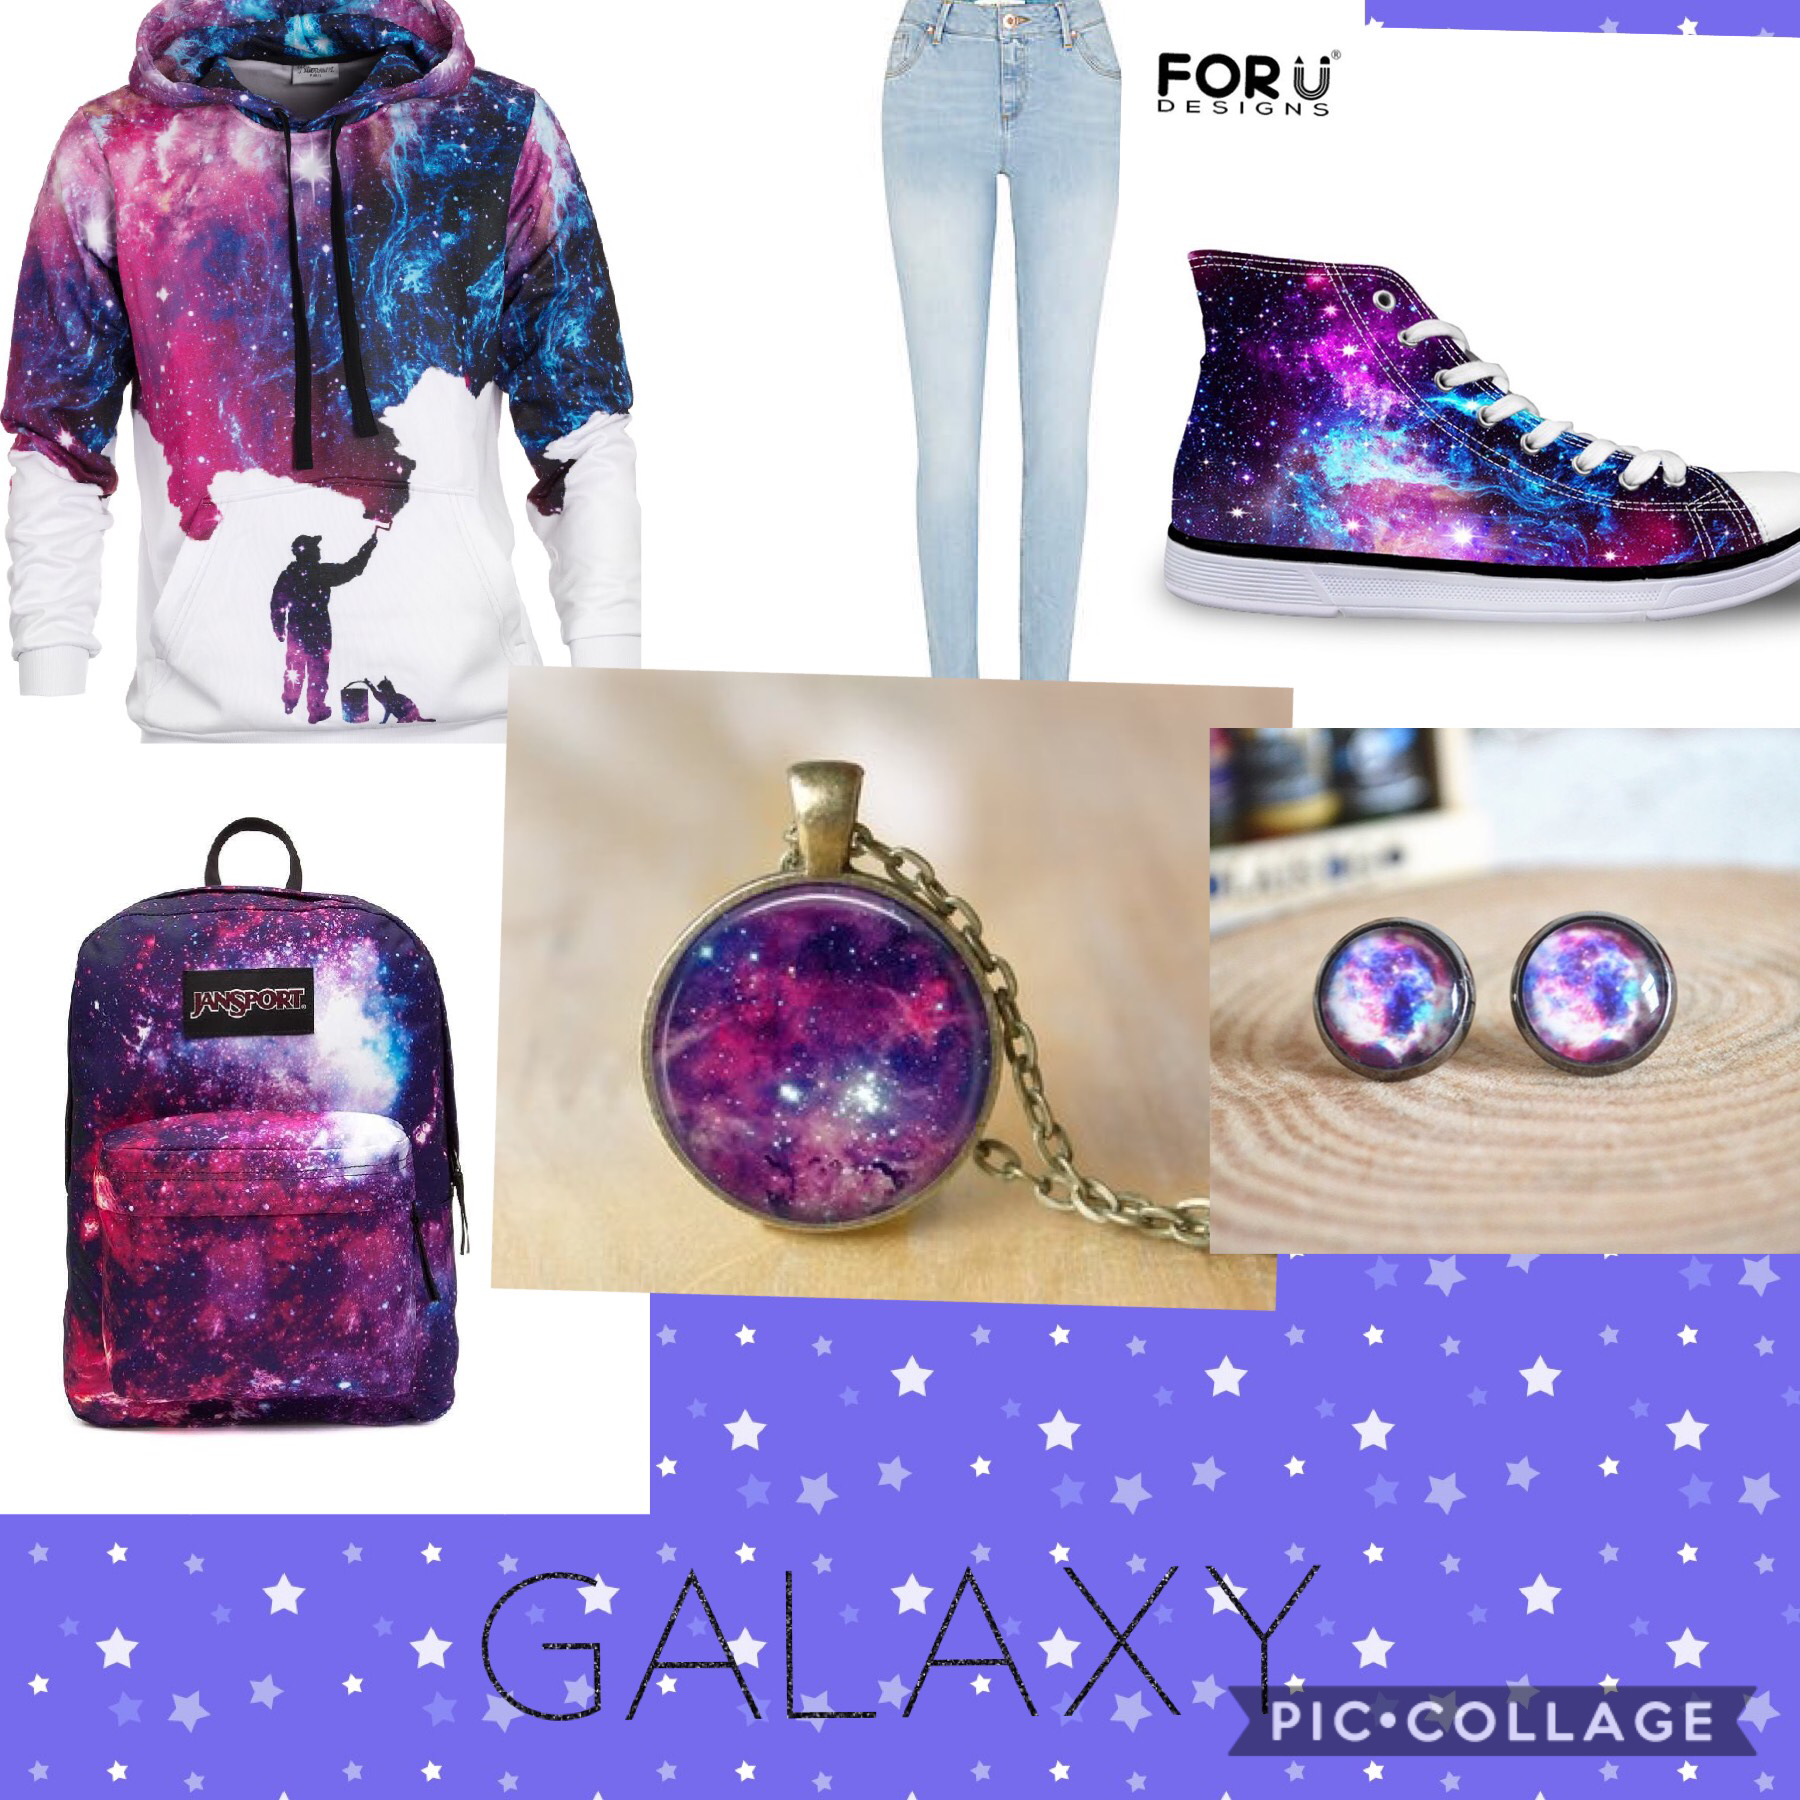 Style theme: galaxy
P.S expect a LOT of fashion collages from me...